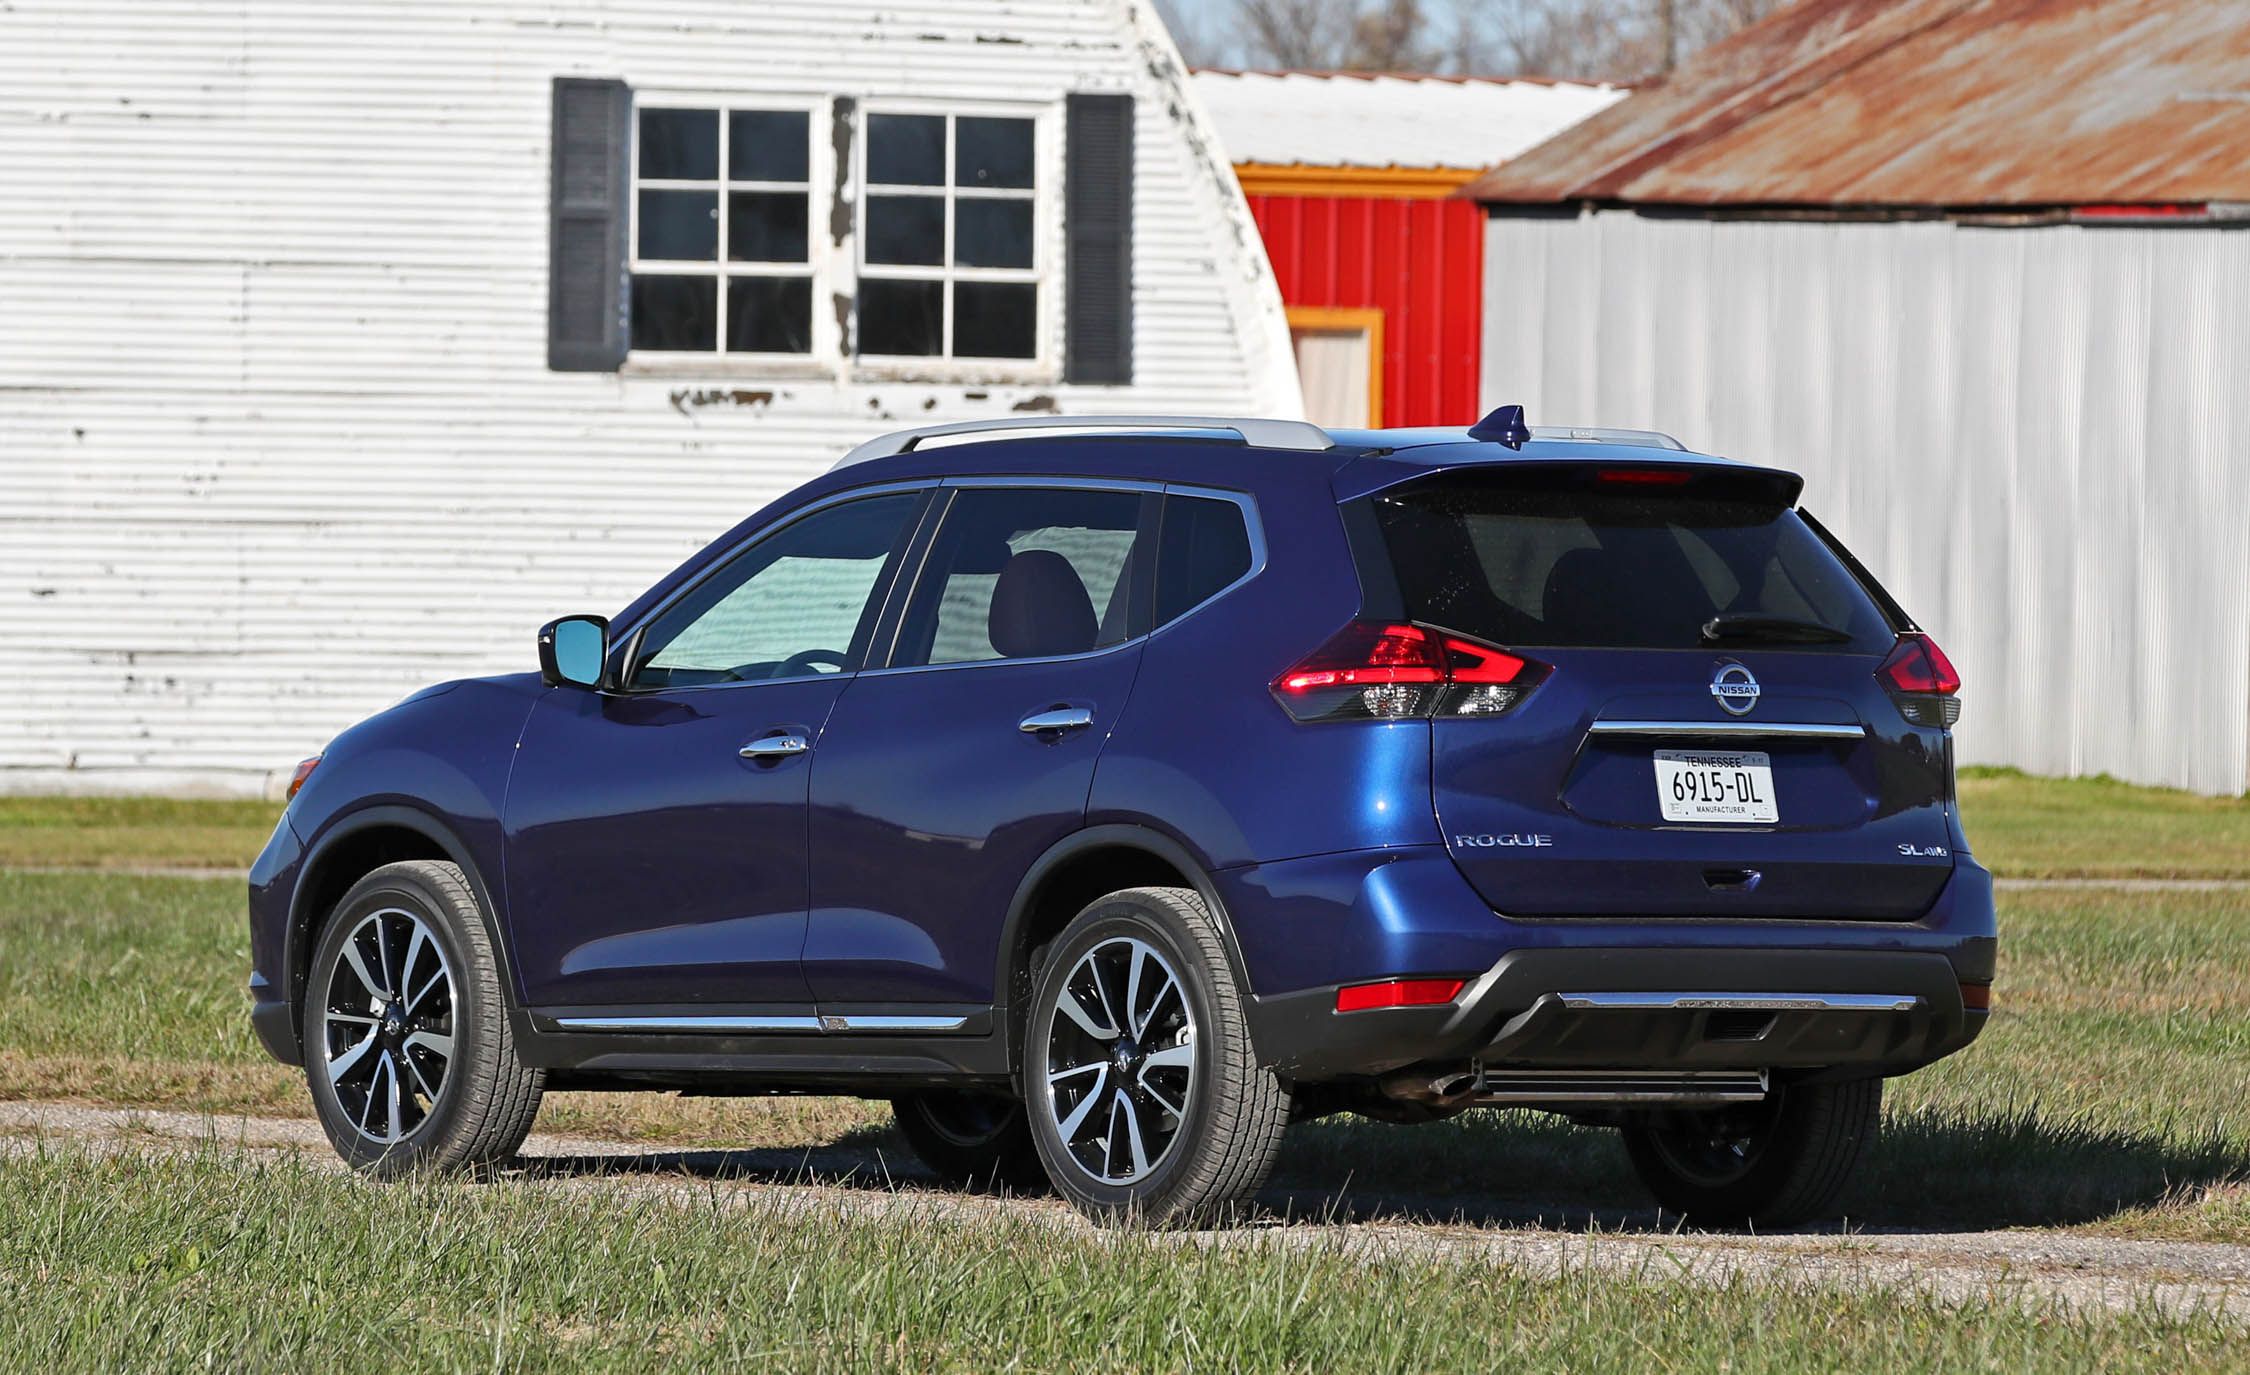 2017 Nissan Rogue Exterior Rear And Side (View 35 of 37)